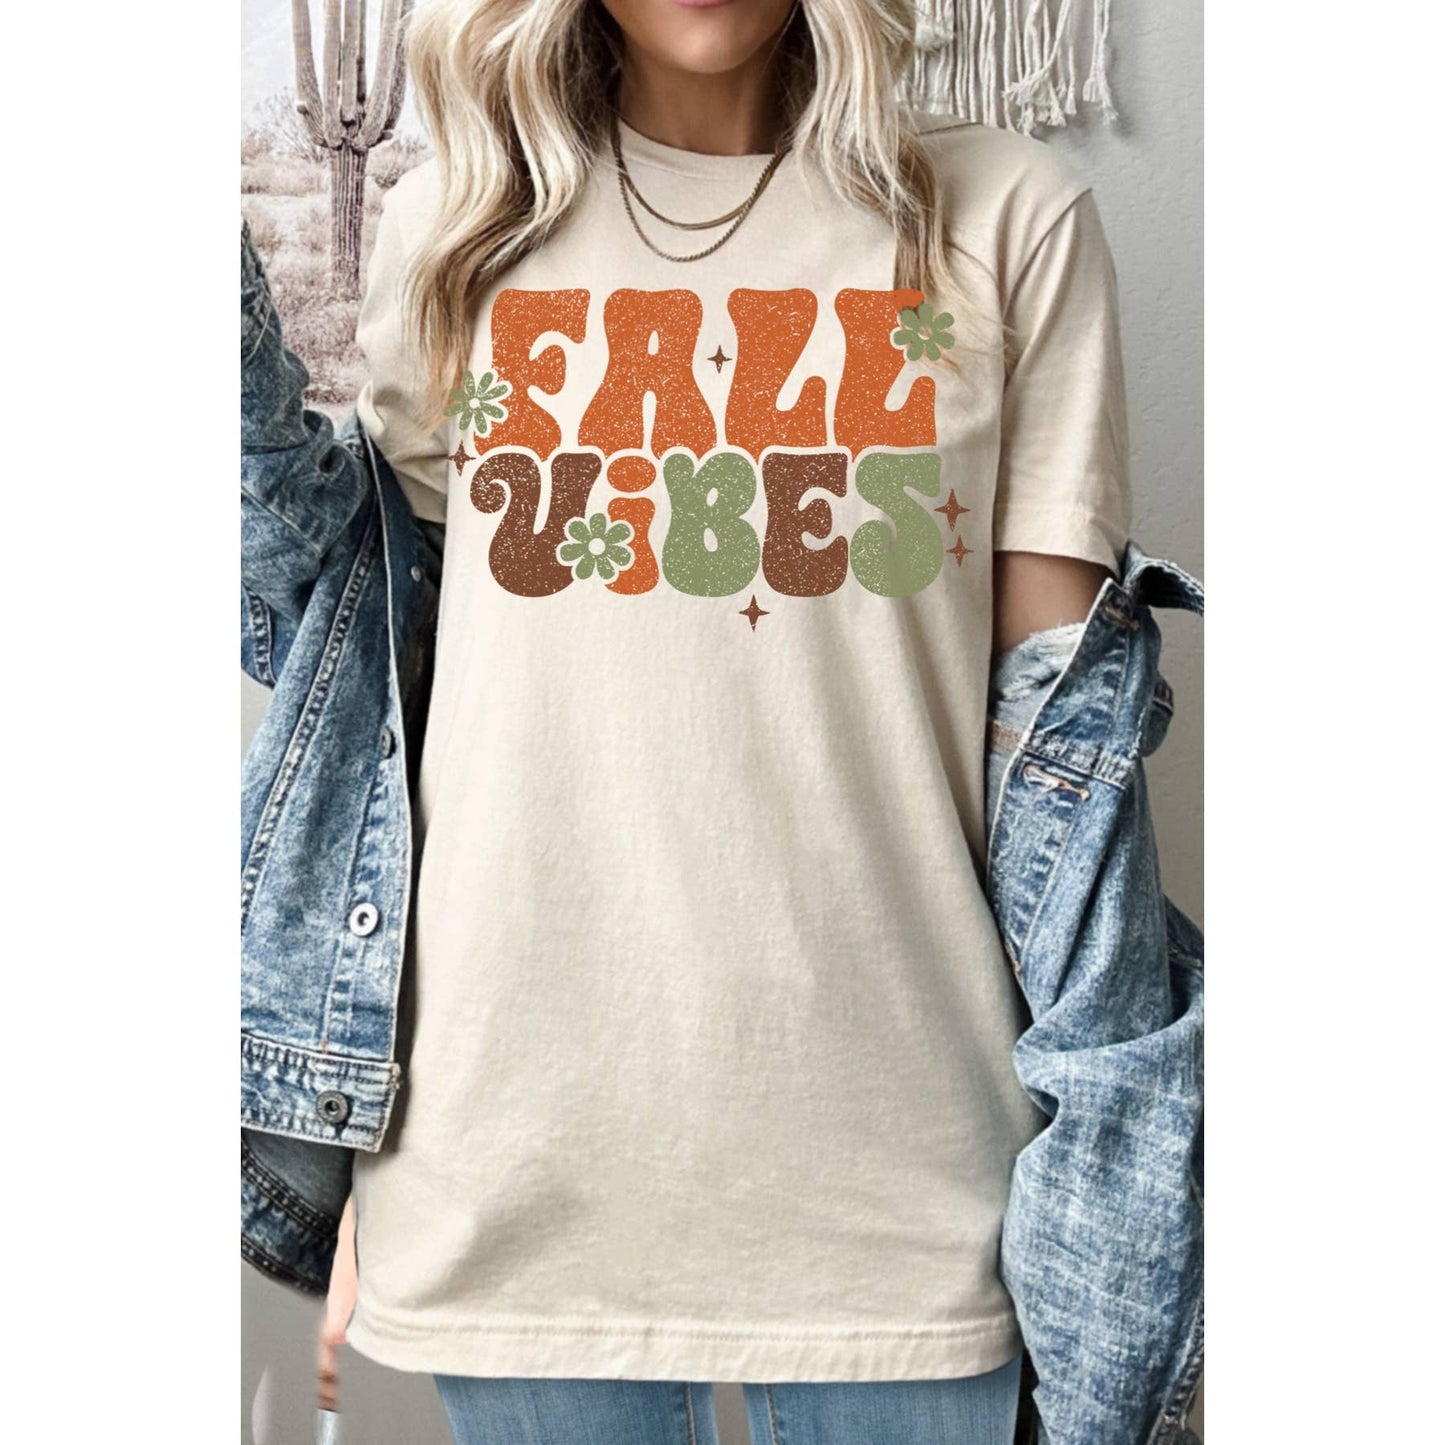 SALE! Vintage Fall Vibes Graphic Tee (S-XL)